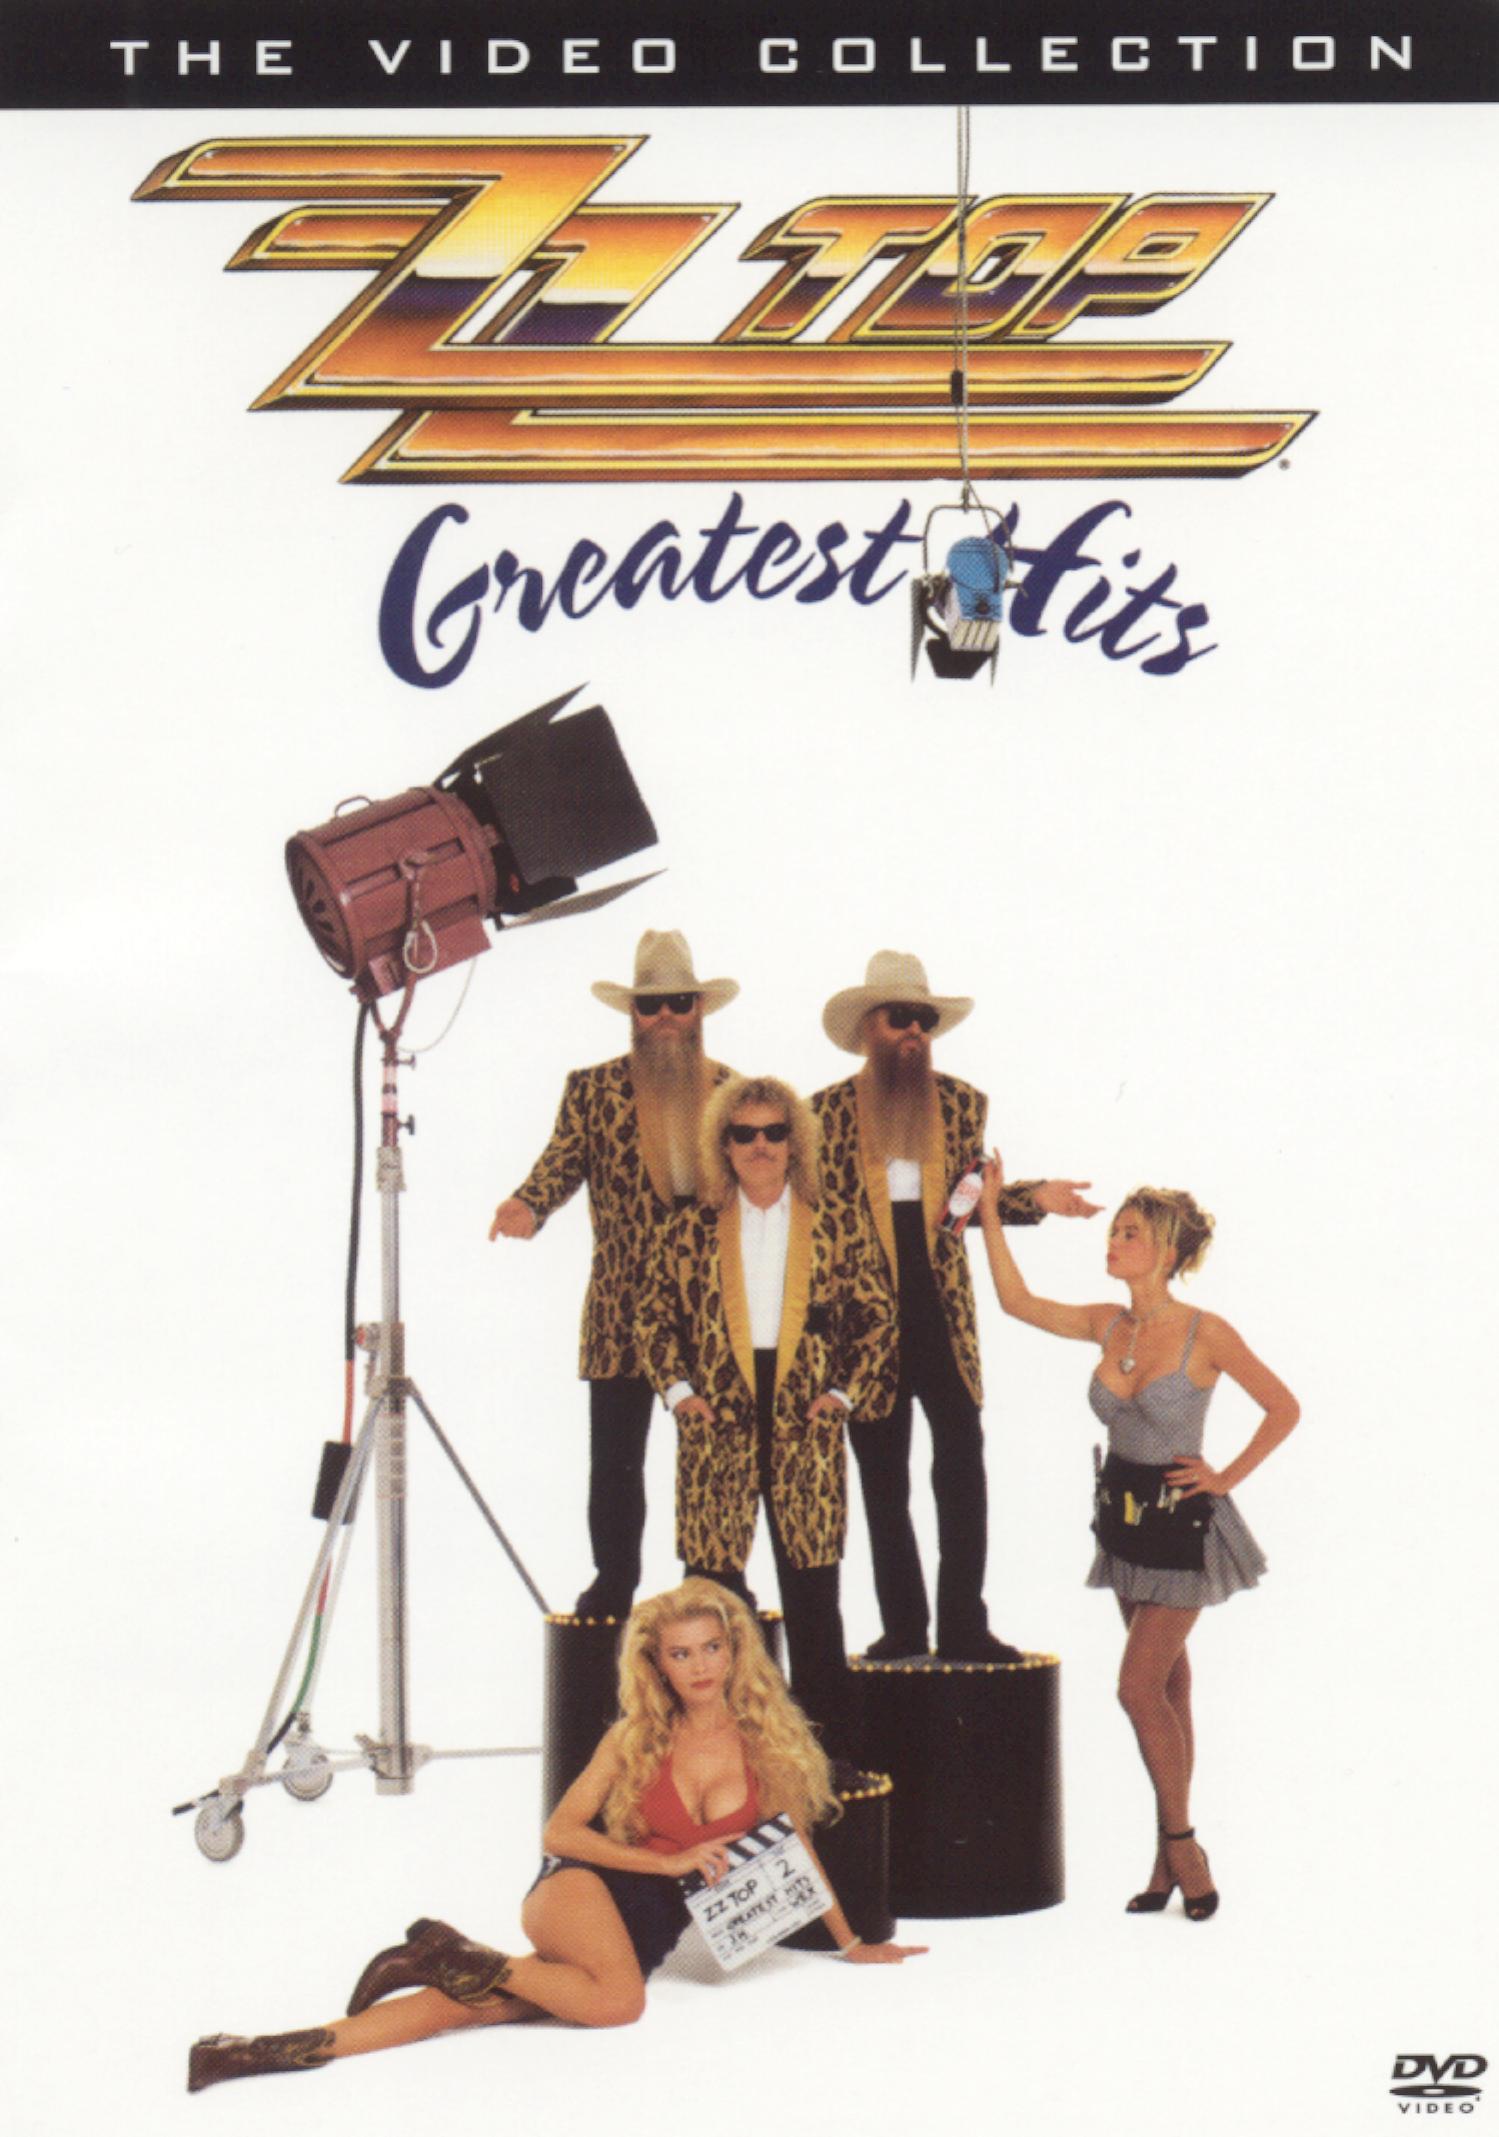 who is the blond on the cover of zz tops greatest hits album